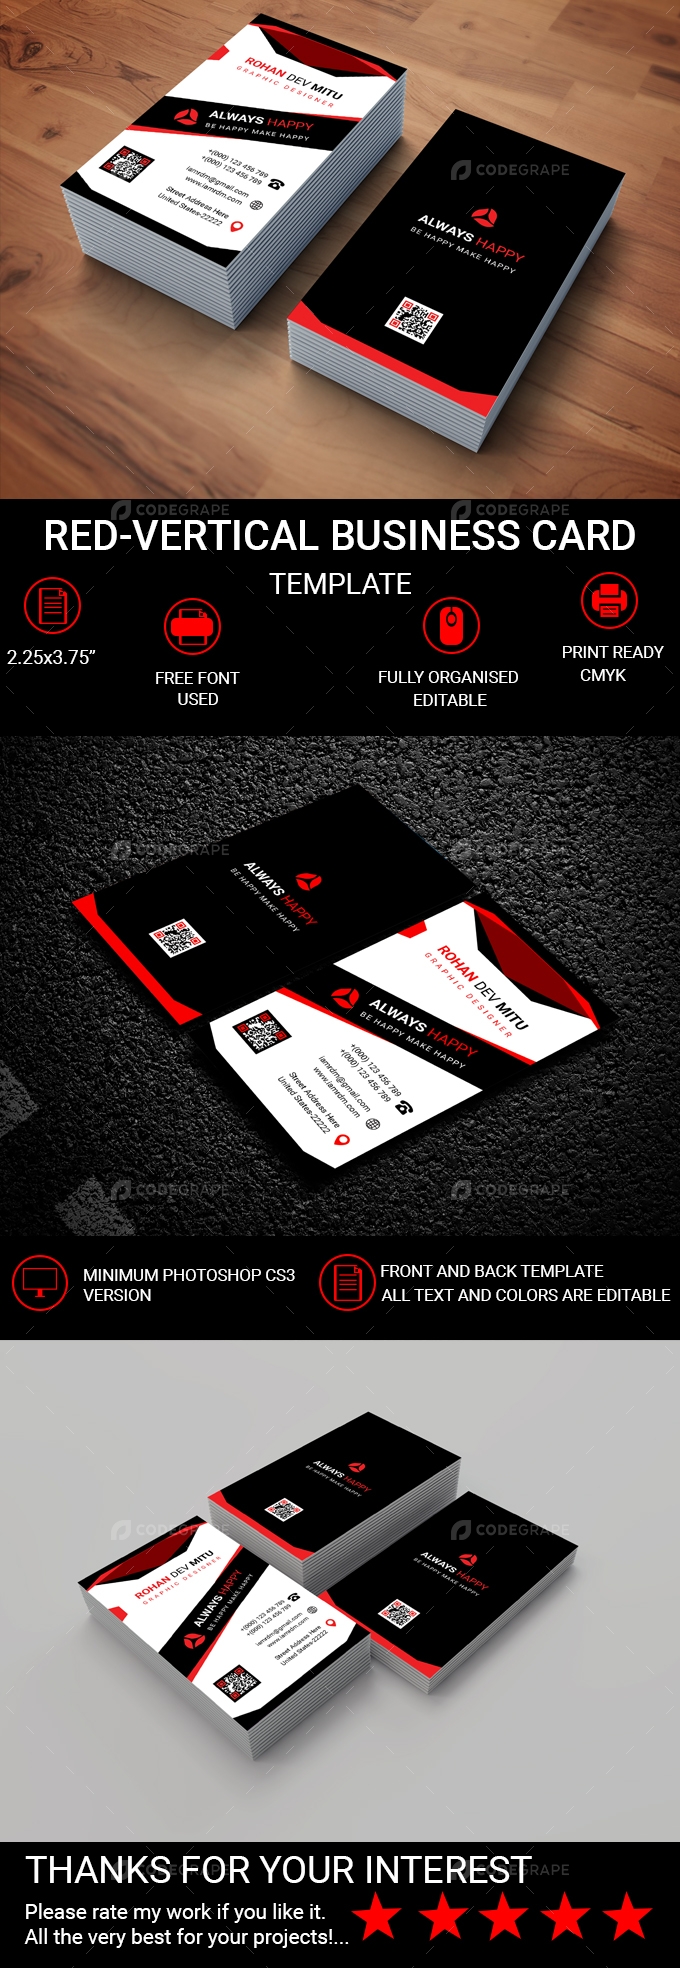 Red-Vertical Business Card